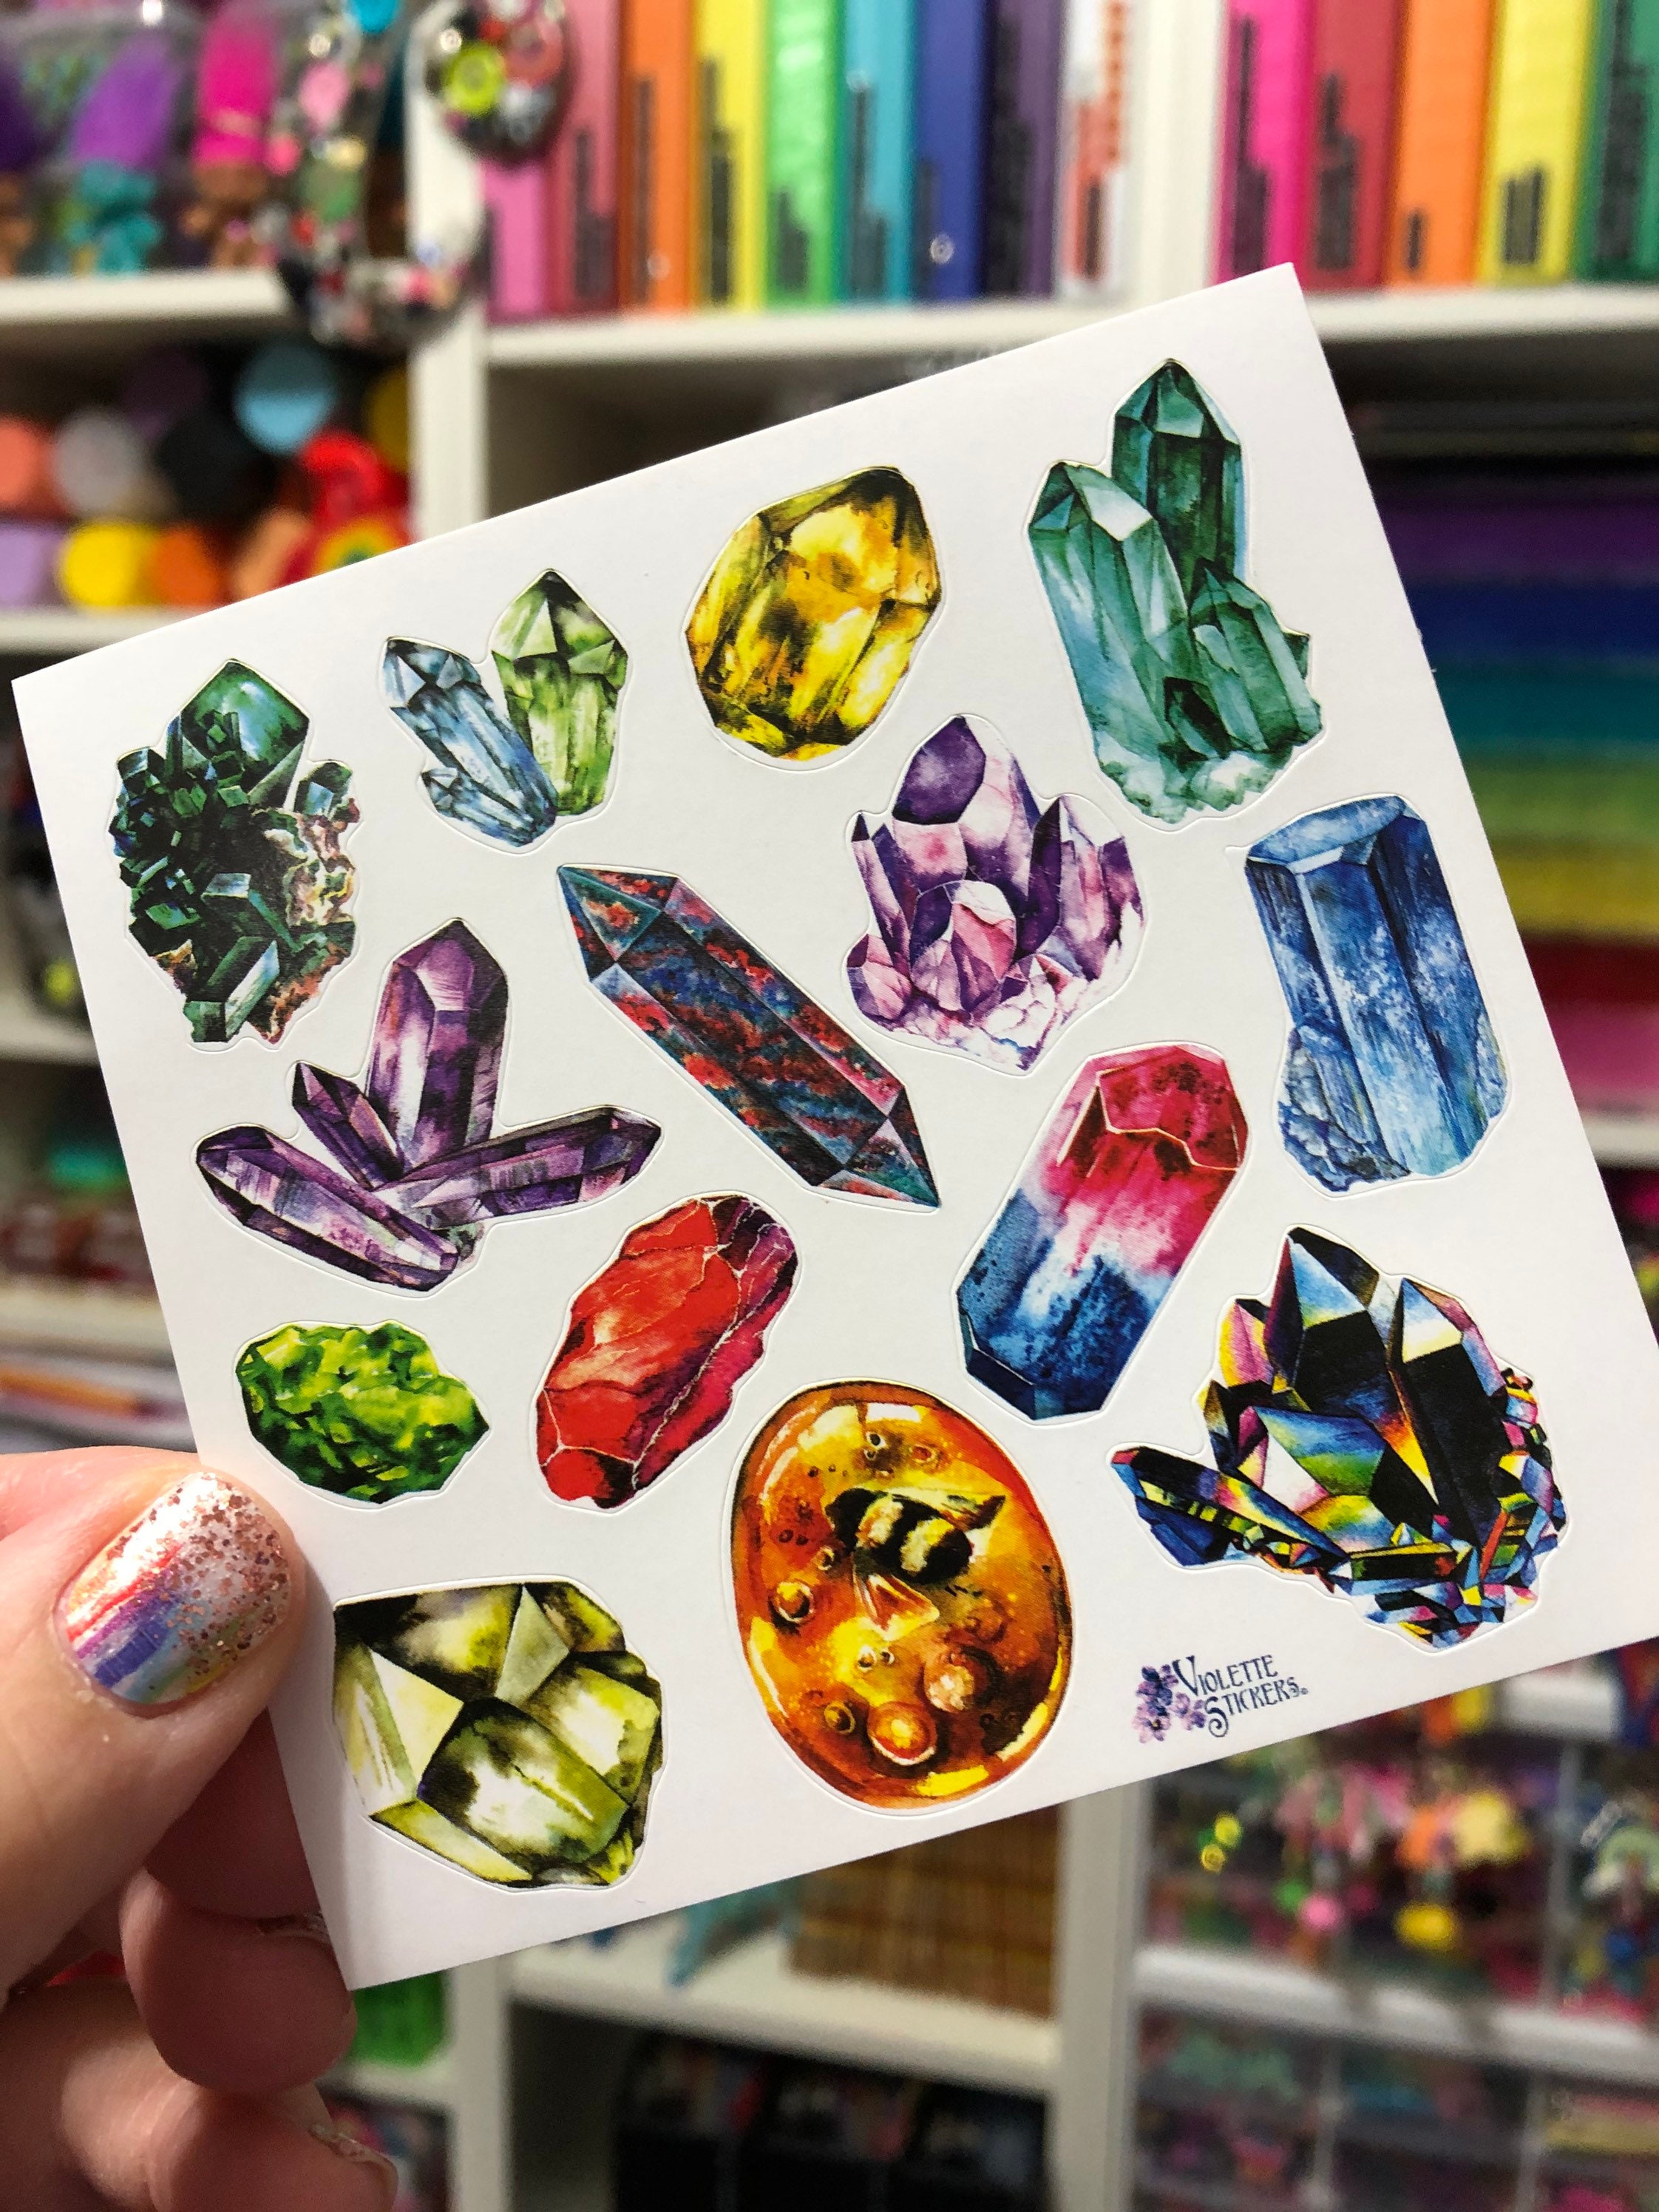 Bold Crystal Cluster Stickers Sheet